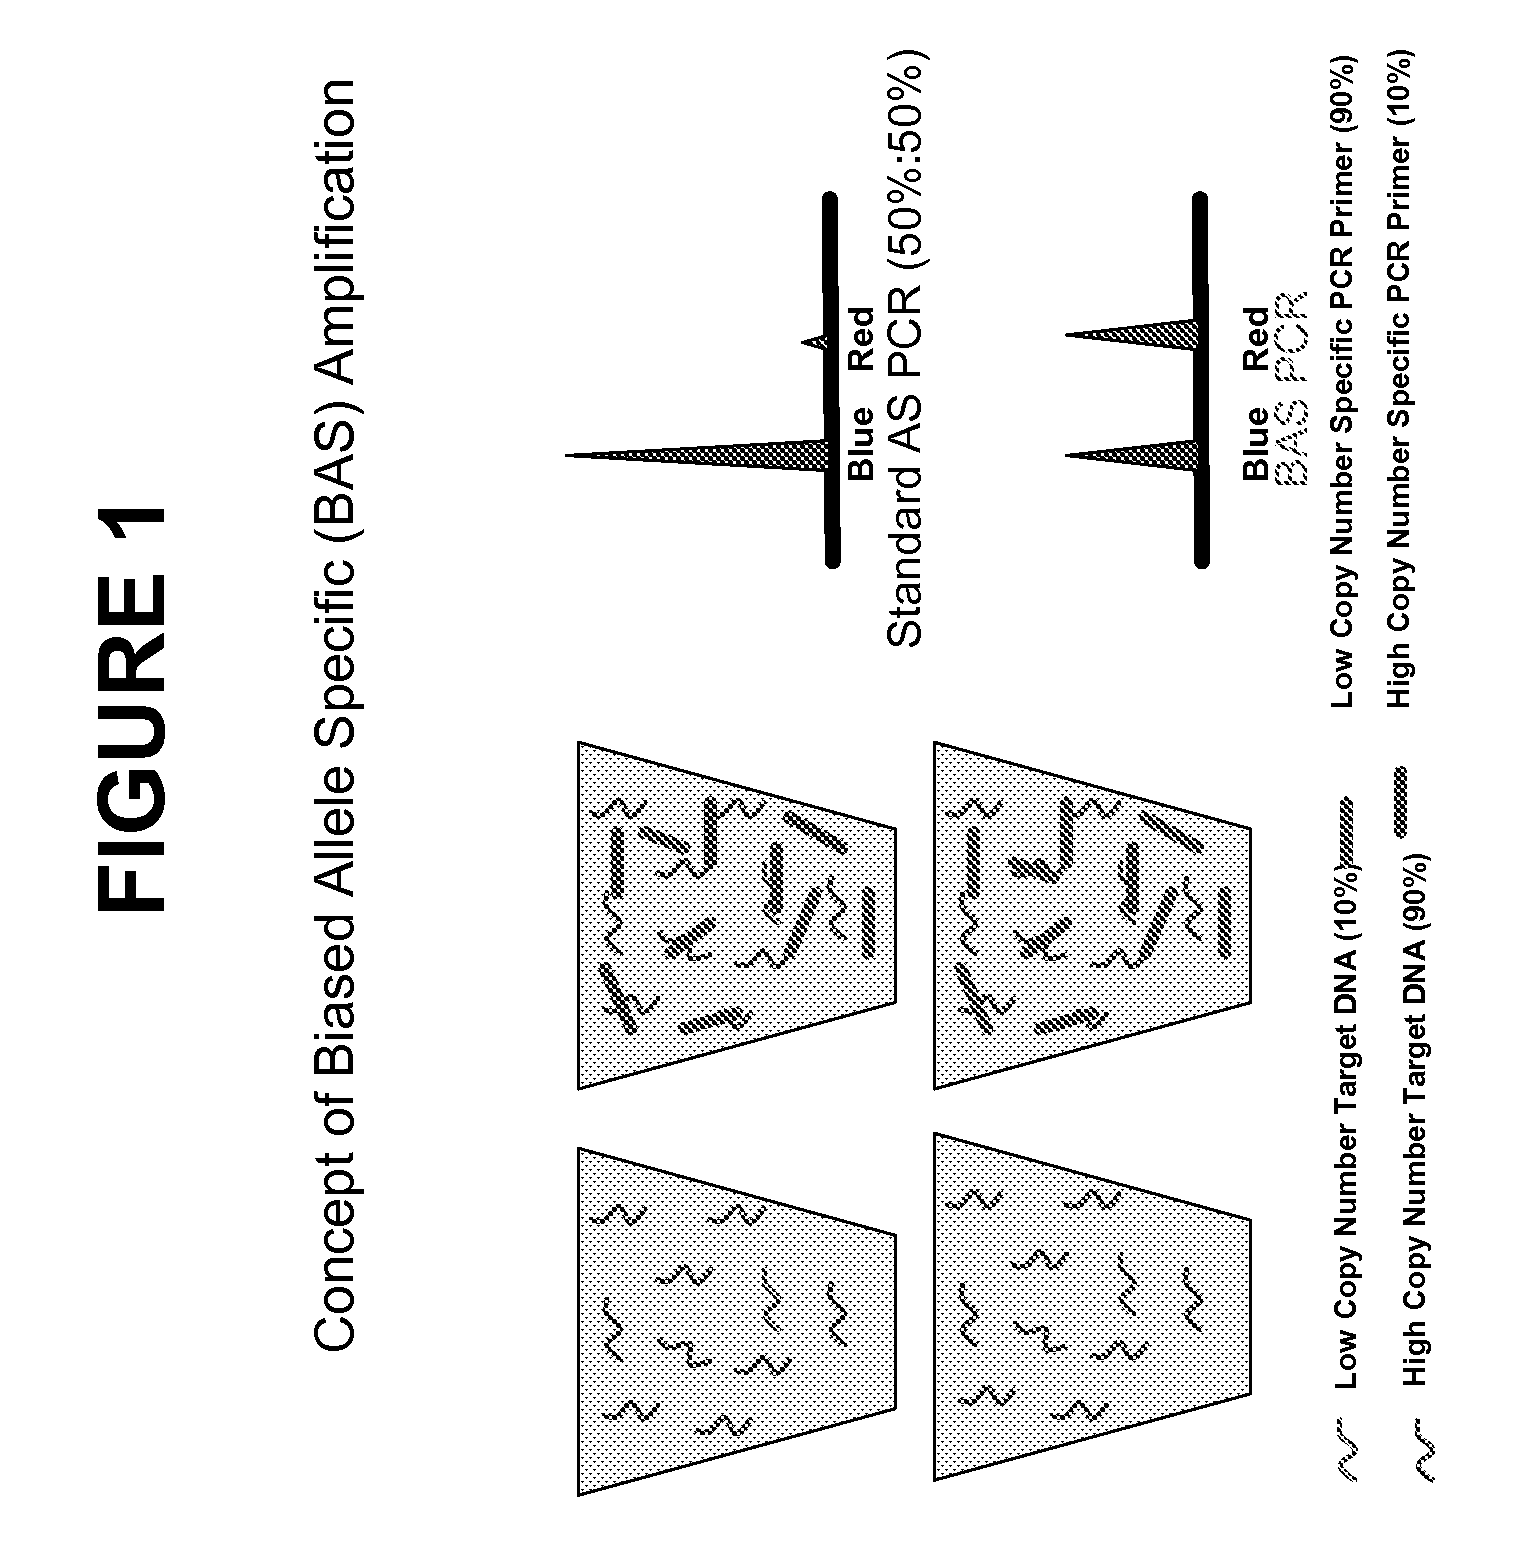 Methods and compositions for the amplification, detection and quantification of nucleic acid from a sample